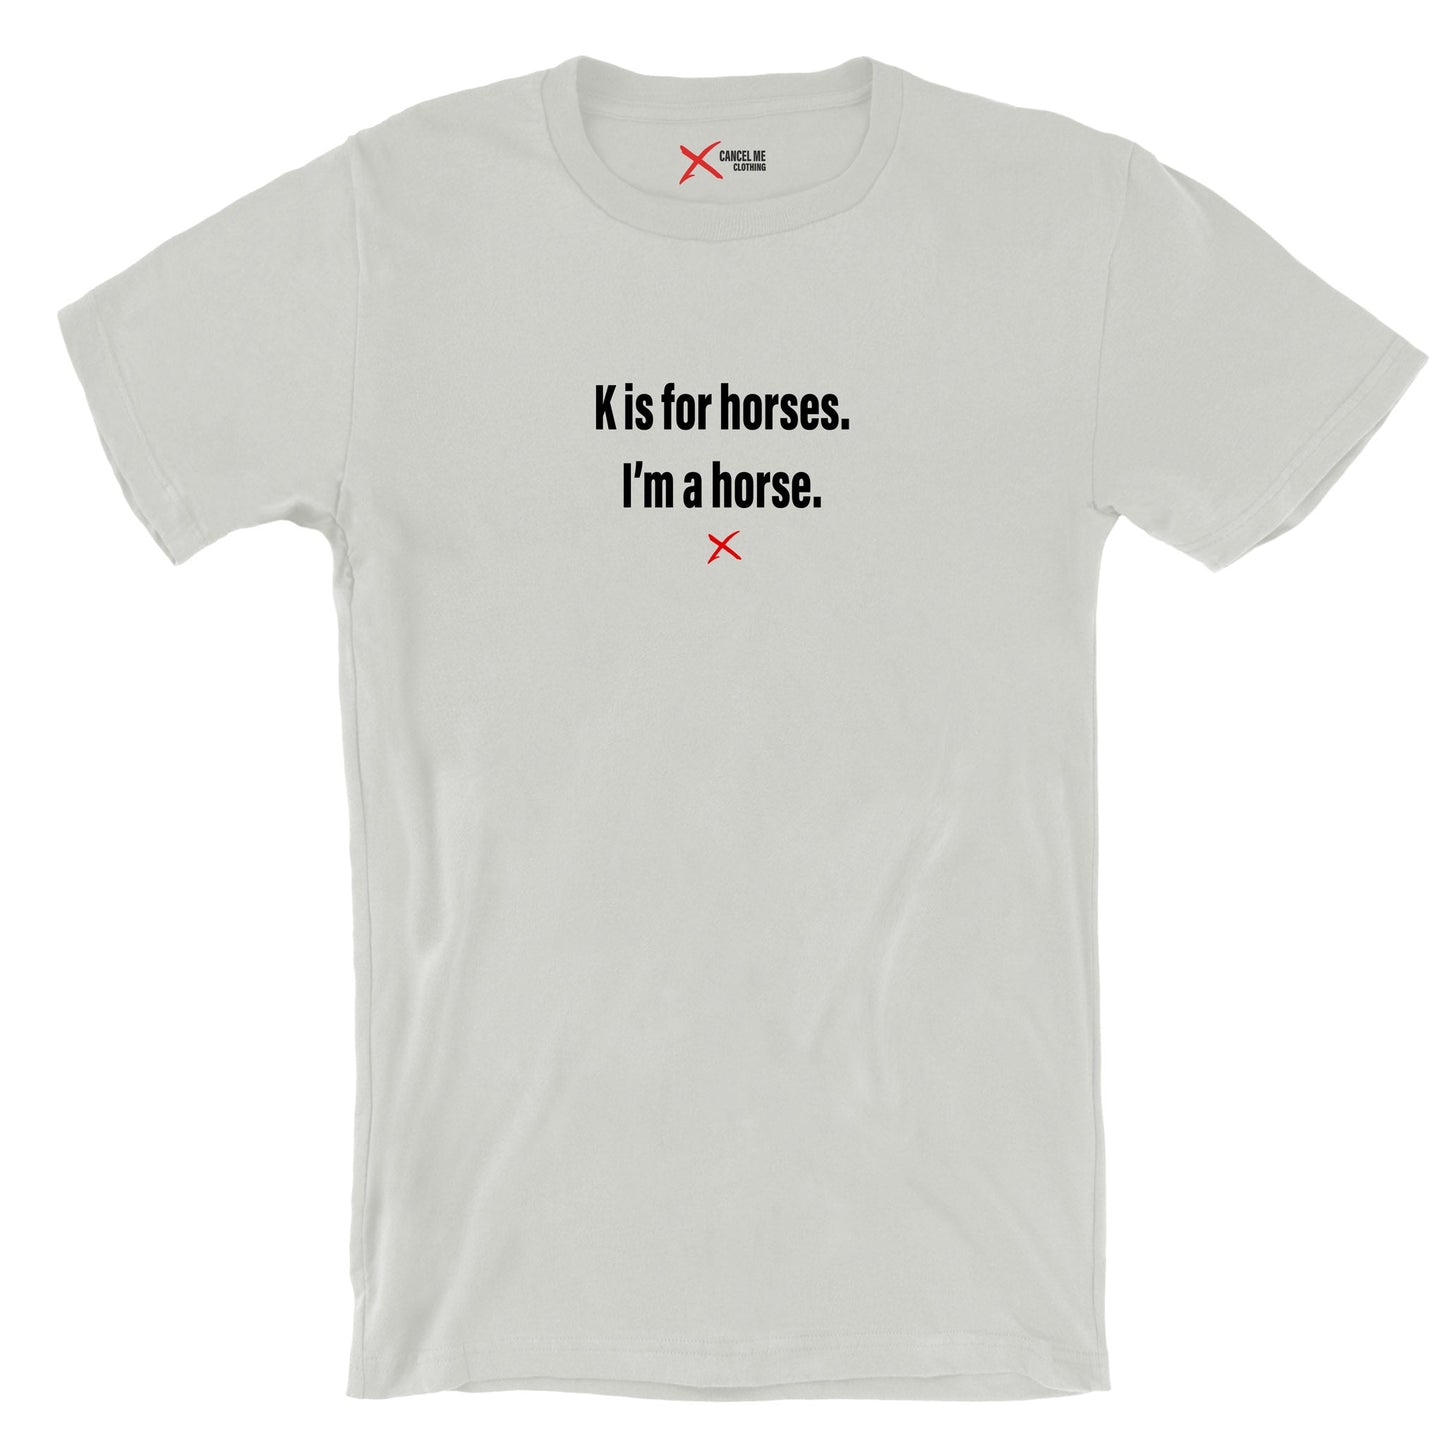 K is for horses. I'm a horse. - Shirt